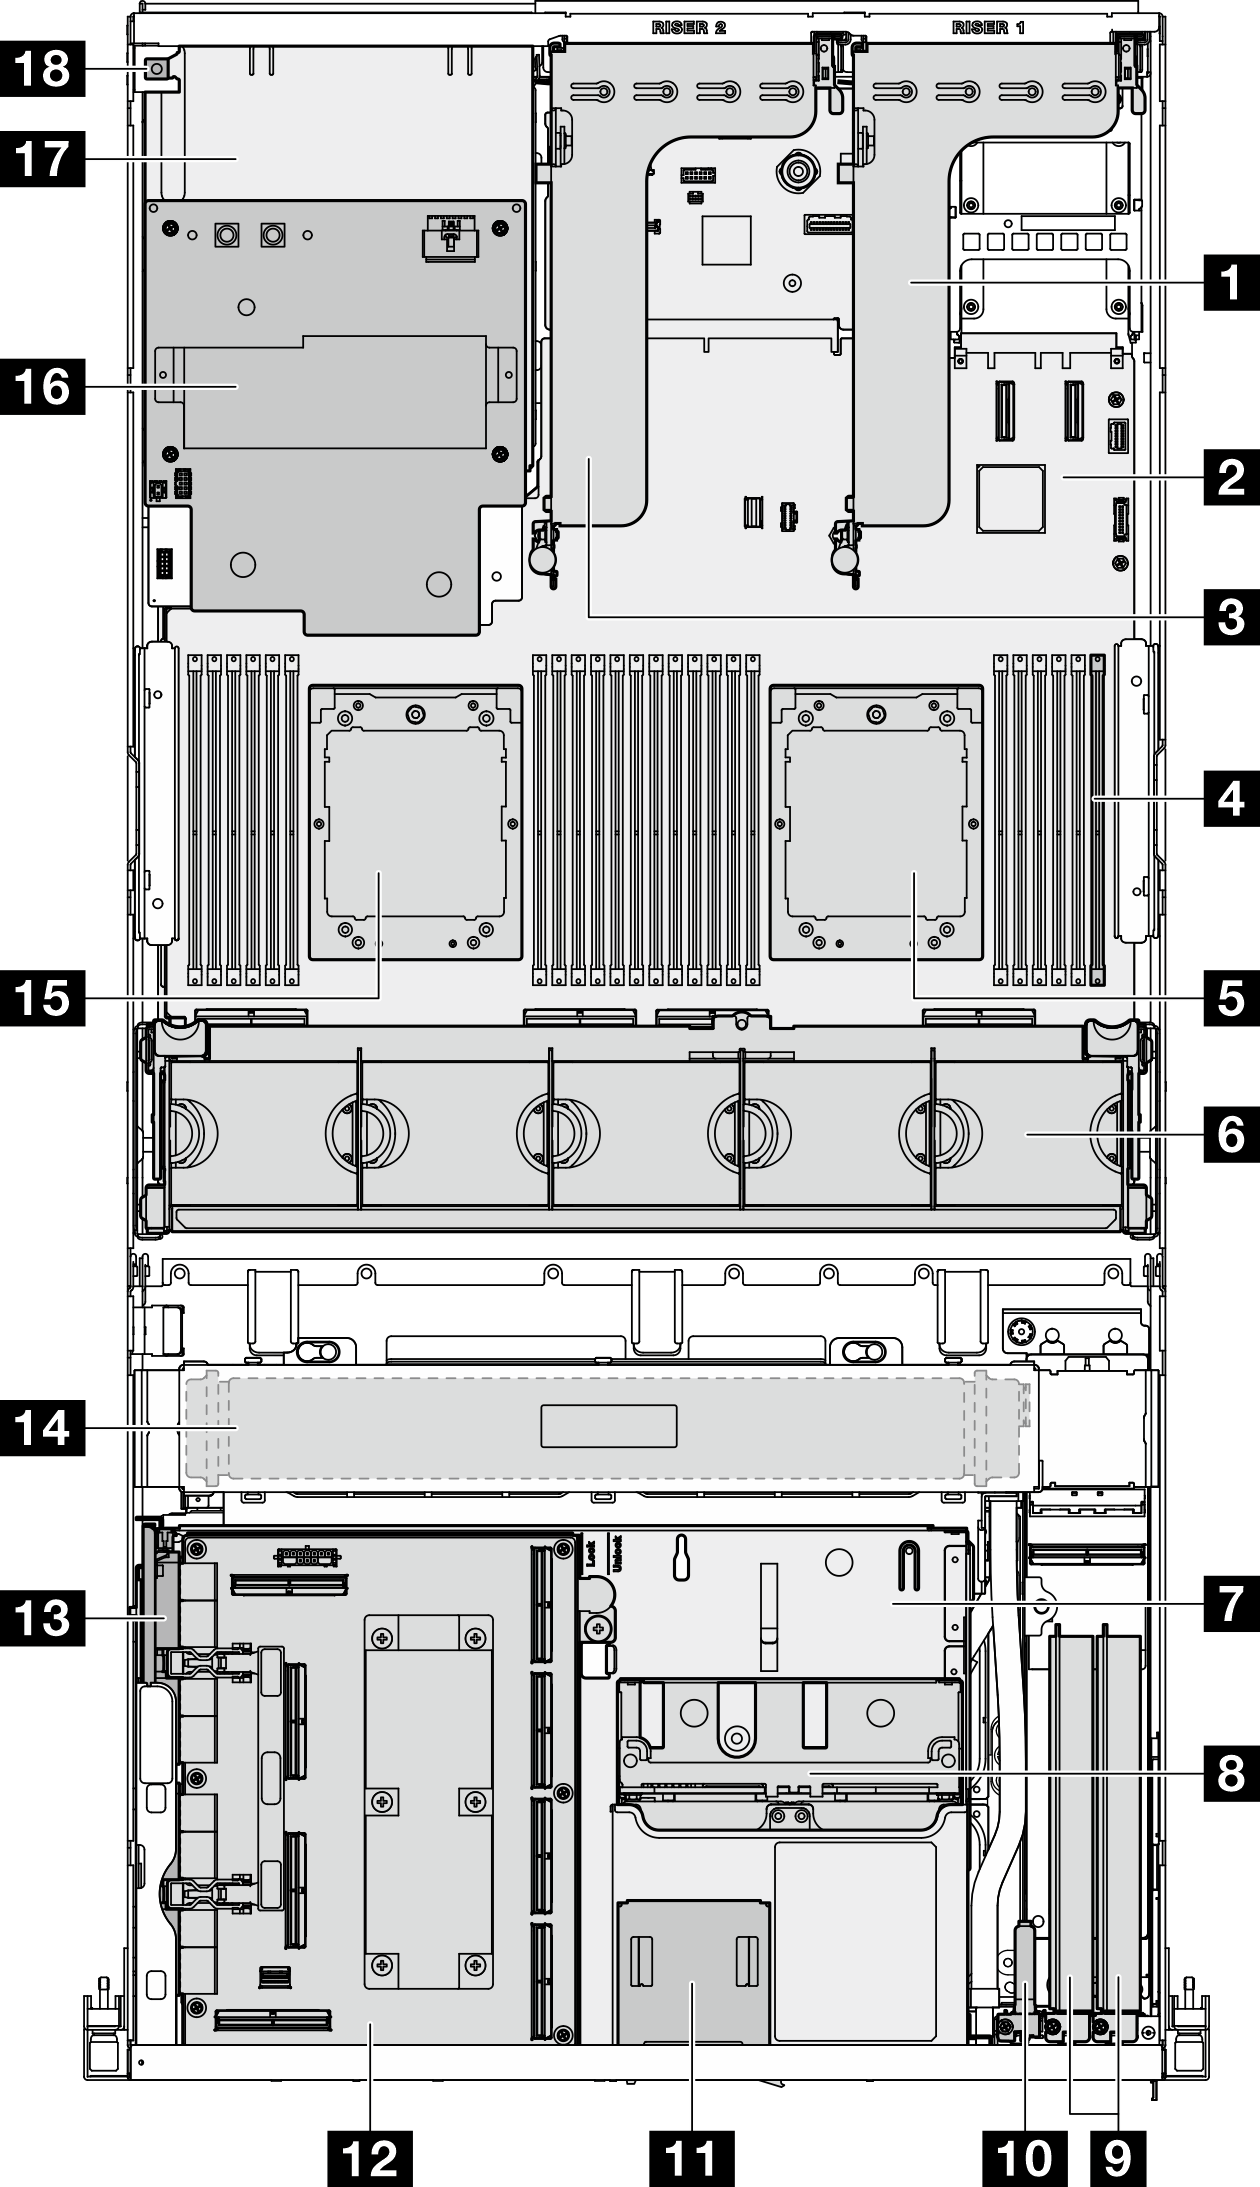 Top view with 4x 2.5-inch drives and Плата коммутатора PCIe SXM5